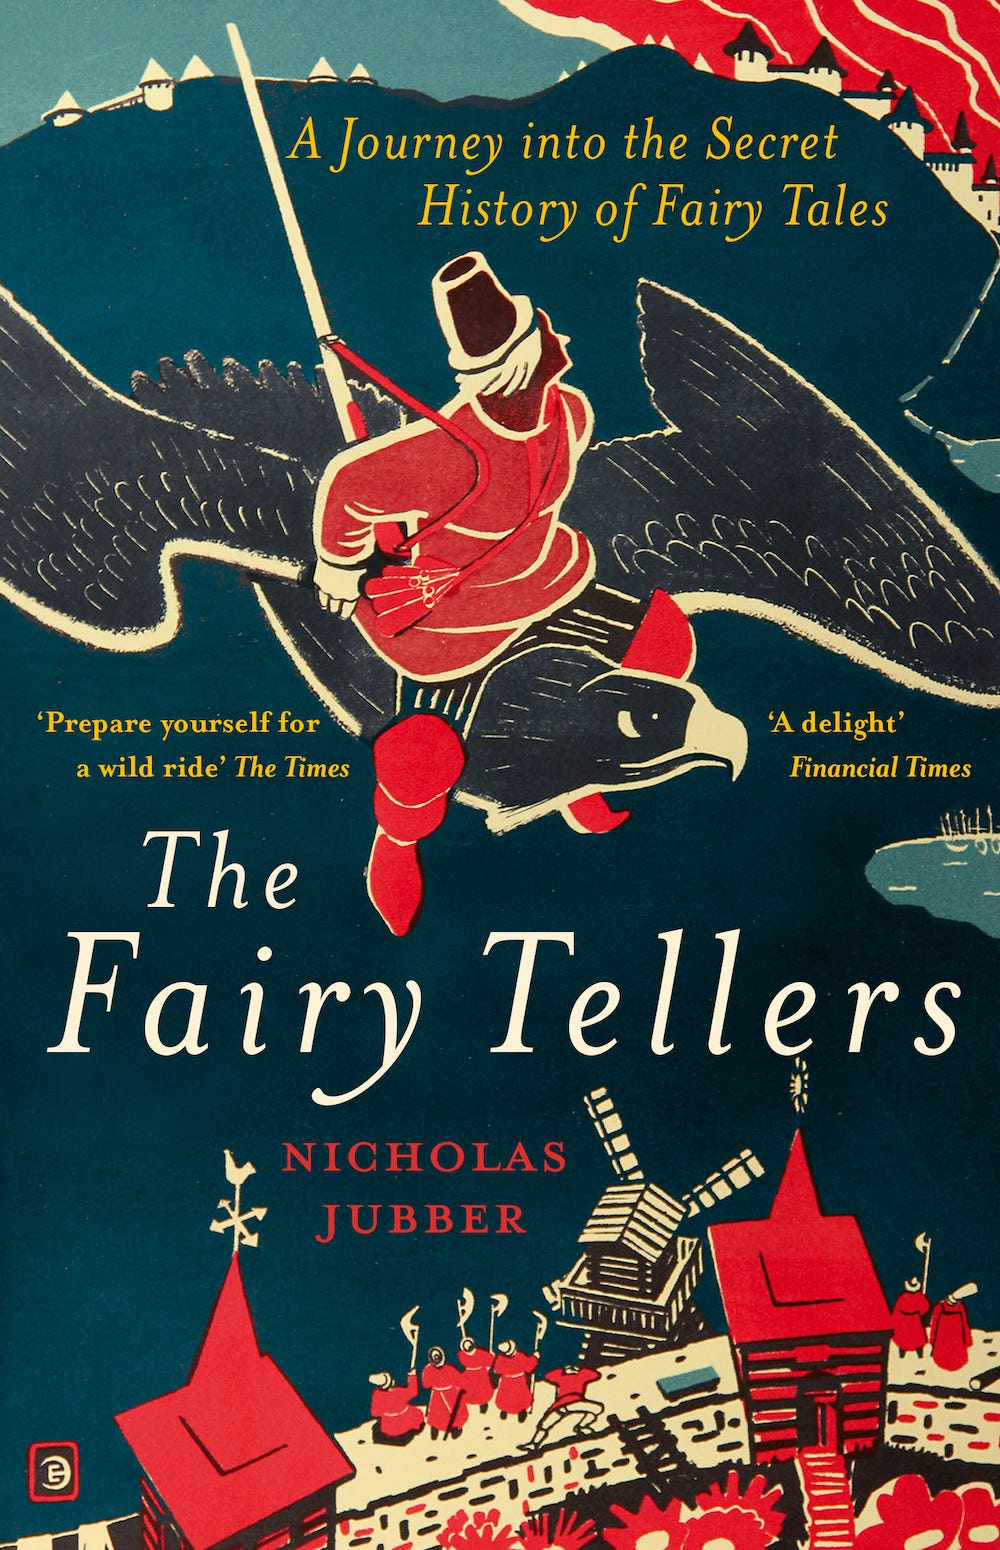 The Fairy Tellers by Nick Jubber